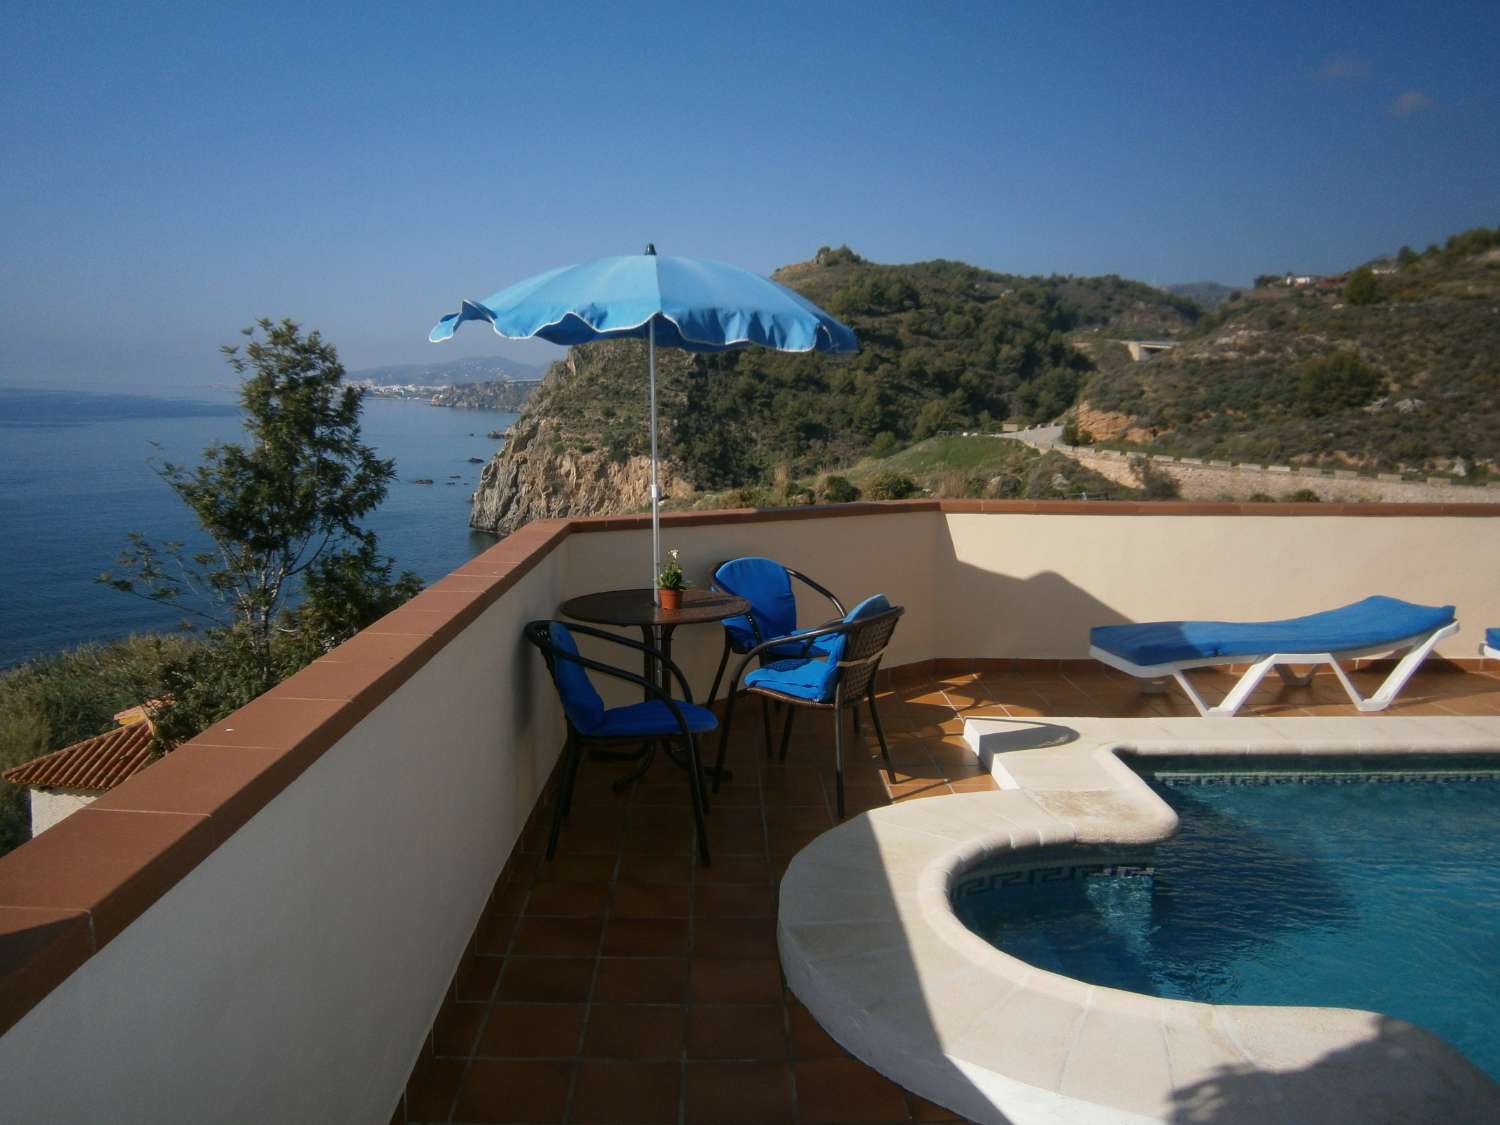 TWO BEDROOM RURAL HOUSE WITH POOL IN PROTECTED AREA NERJA